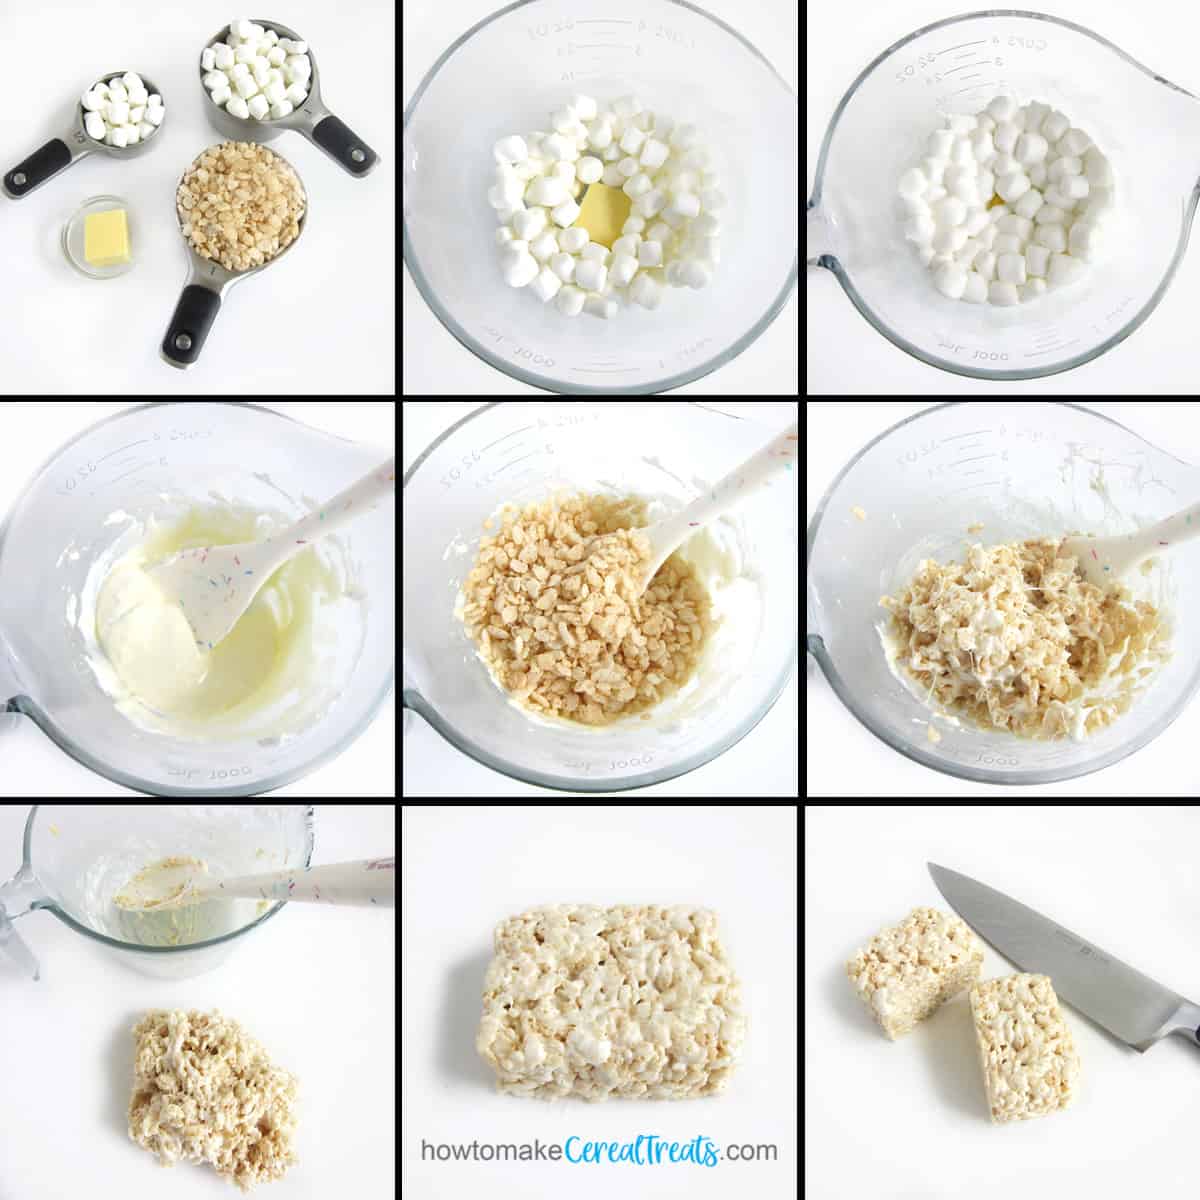 Melt butter and marshmallows in the microwave, then mix in Rice Krispies cereal. Spread into rectangle treat.